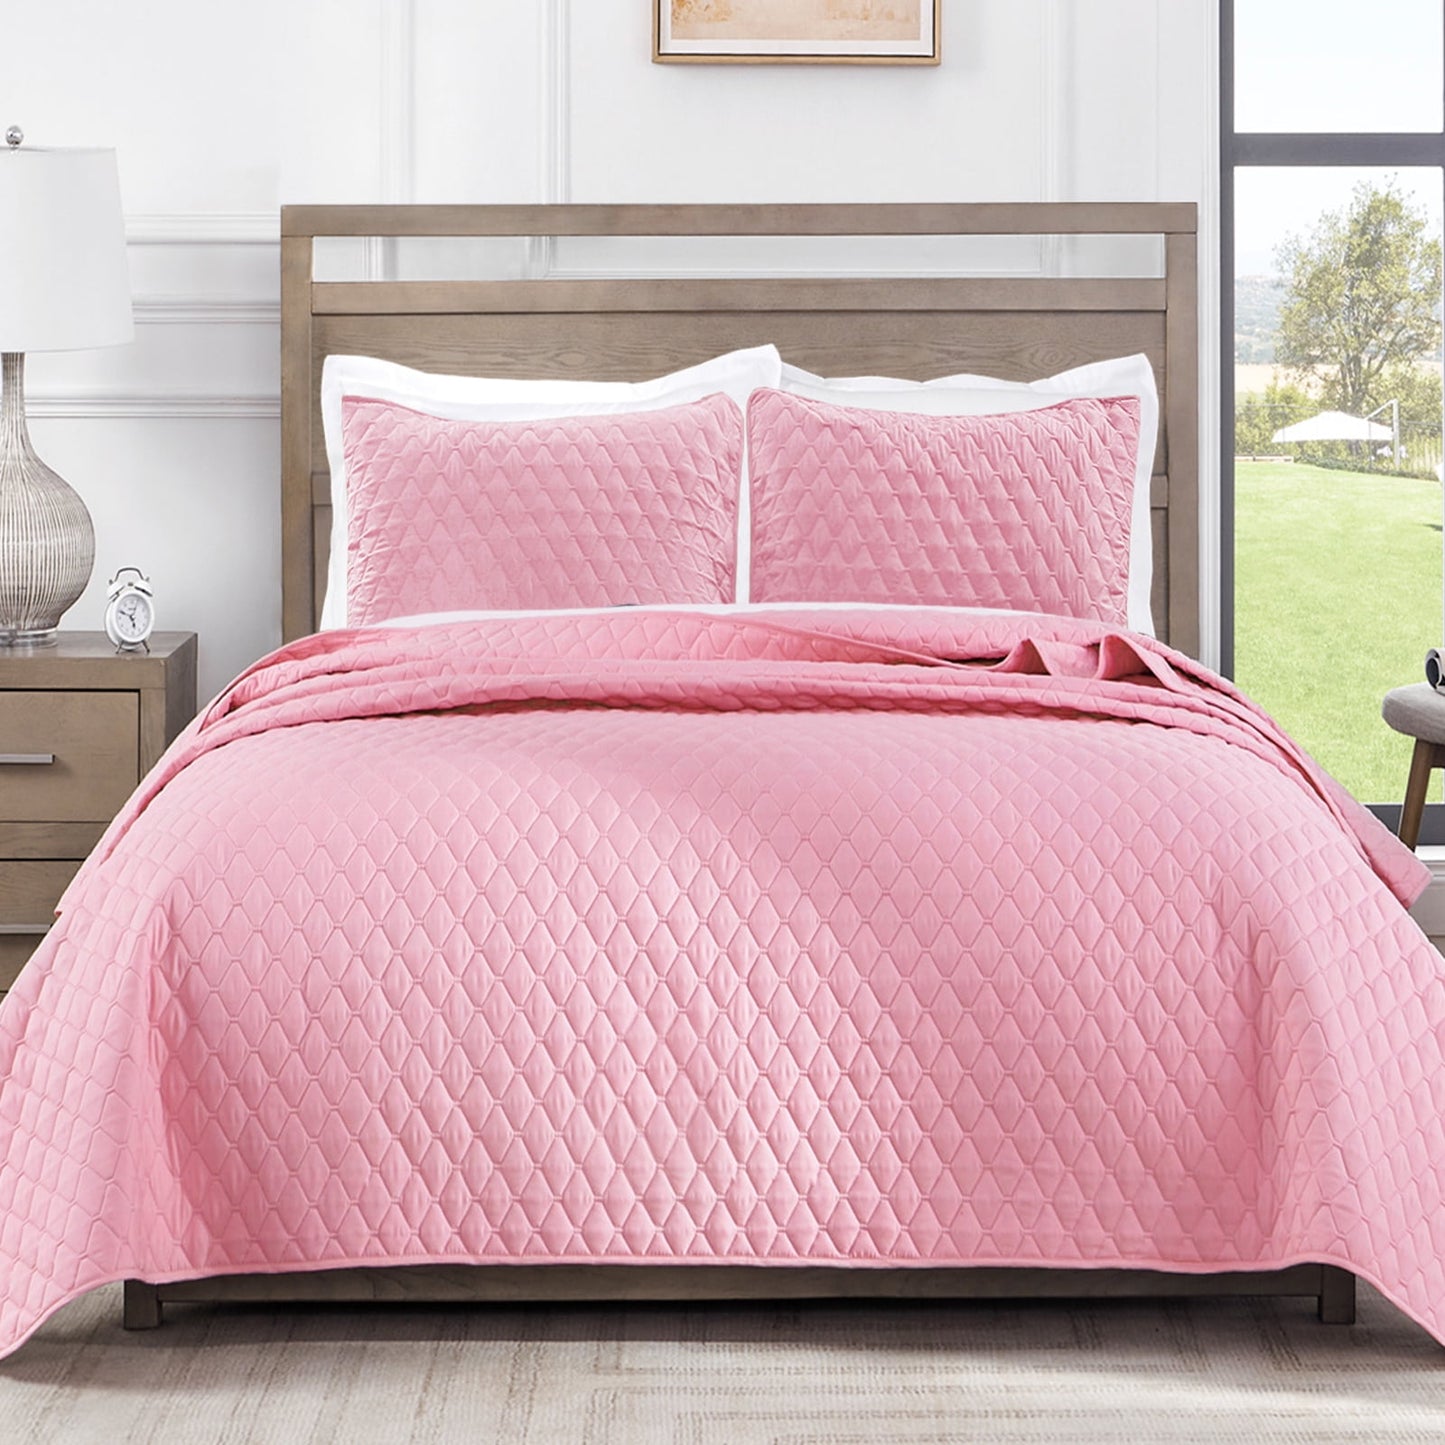 Exclusivo Mezcla Ultrasonic Reversible King Size Quilt Bedding Set with Pillow Shams, Lightweight Quilts King Size, Soft Bedspreads Bed Coverlets for All Seasons - (Bright Pink, 104"x96")